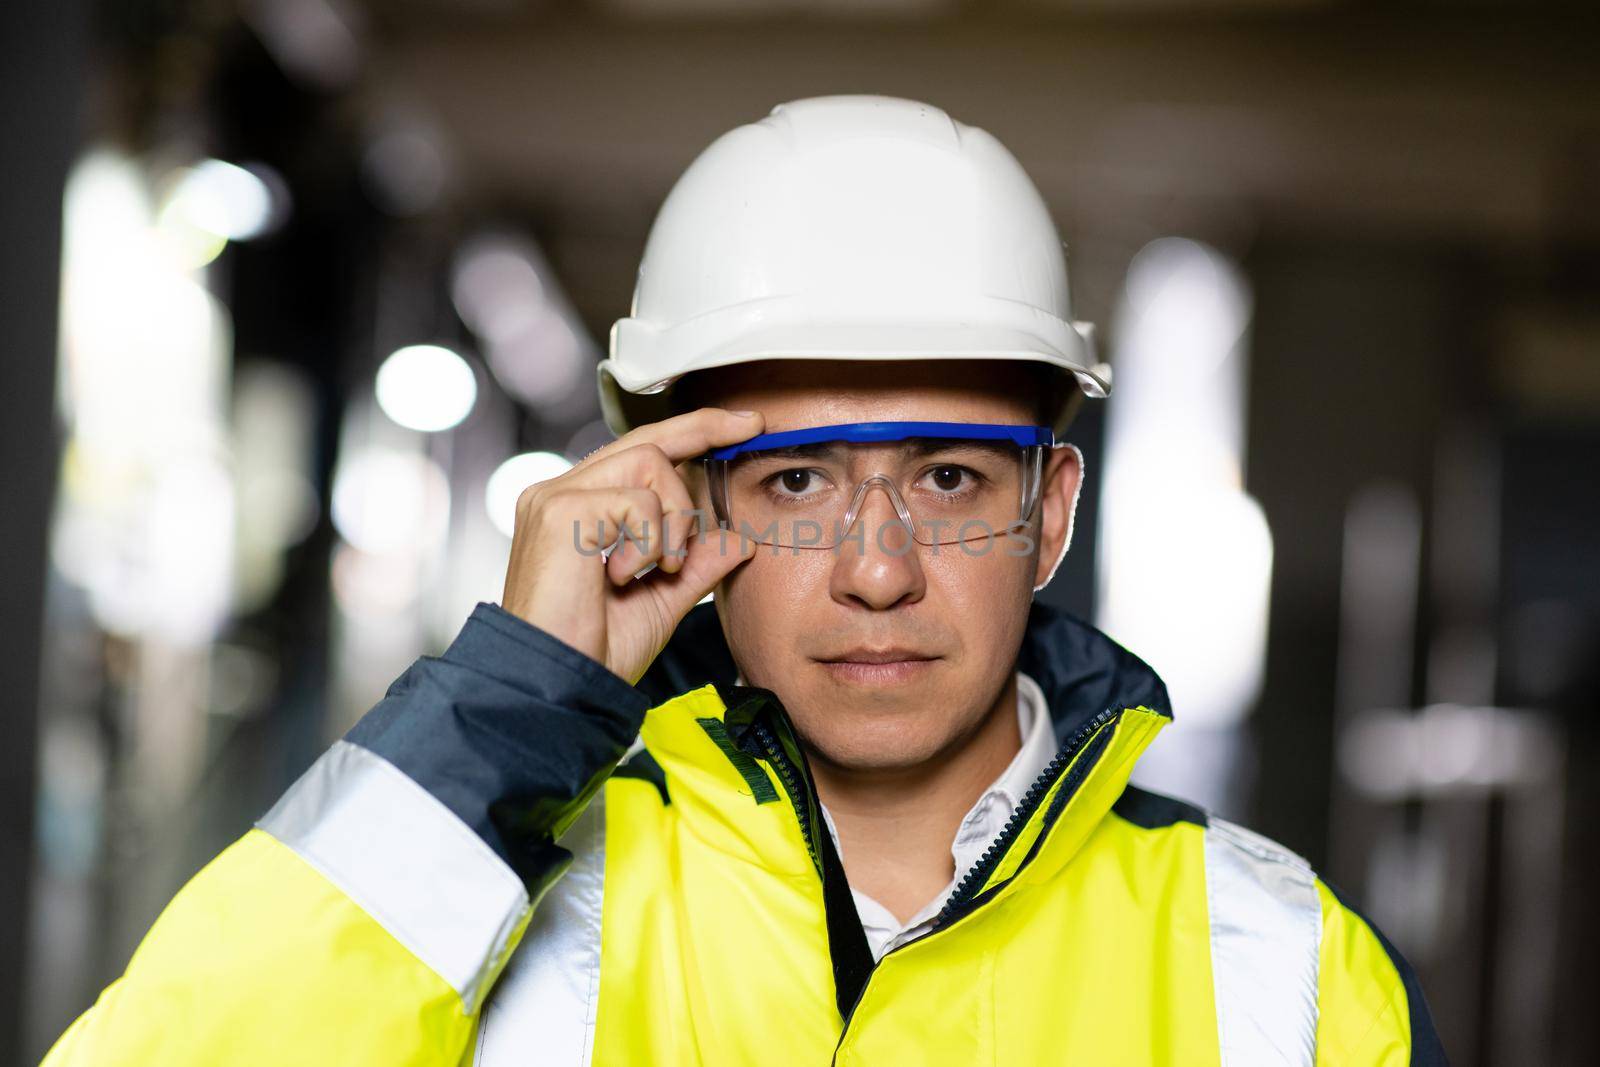 Portrait of employee serious asian man engineer worker wearing safety uniform, goggles and hardhat looking at camera on site factory warehouse background.